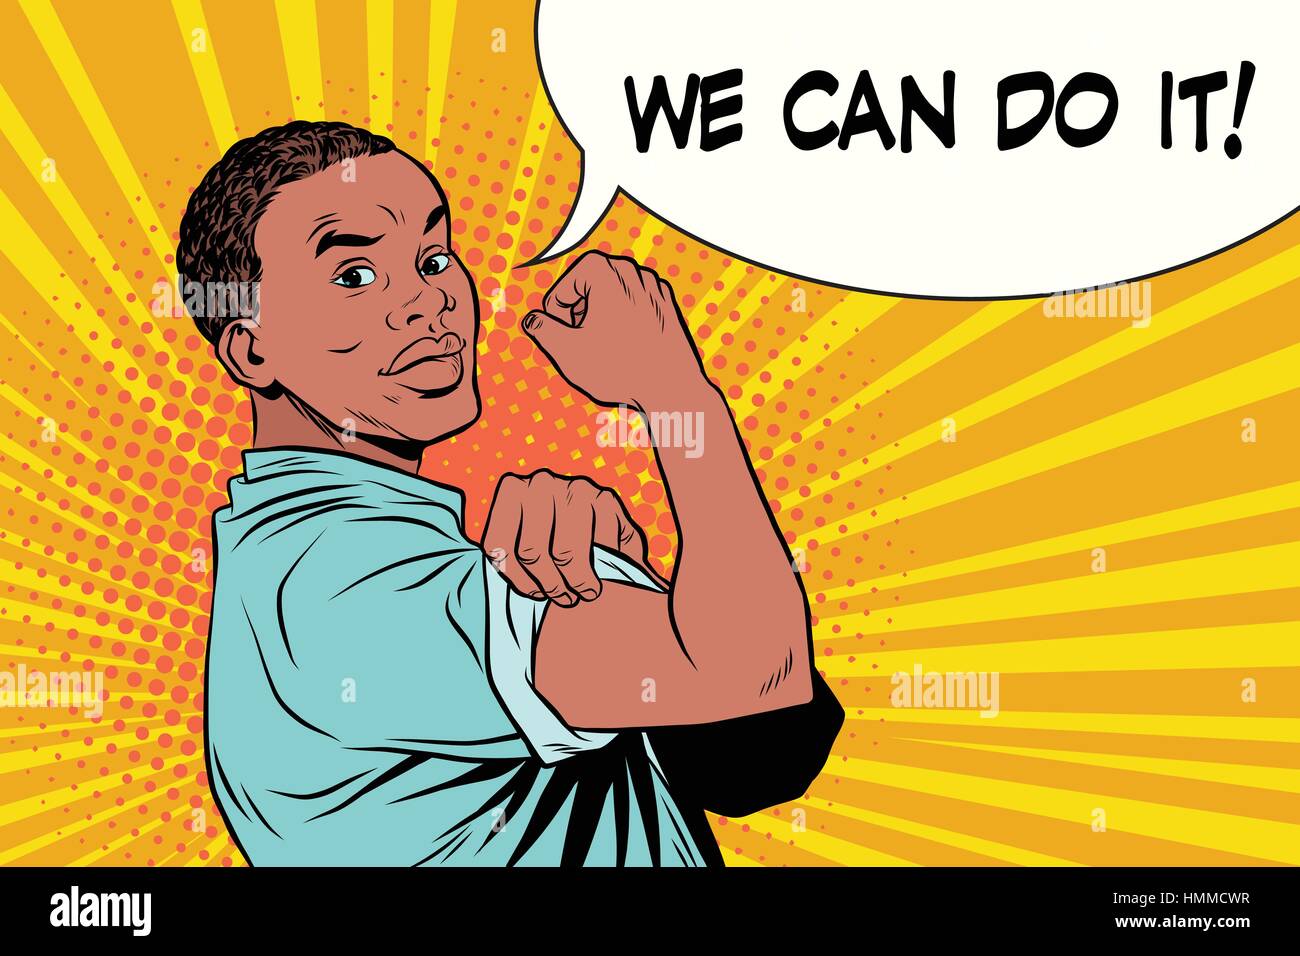 we can do it Protester black man African American Stock Vector